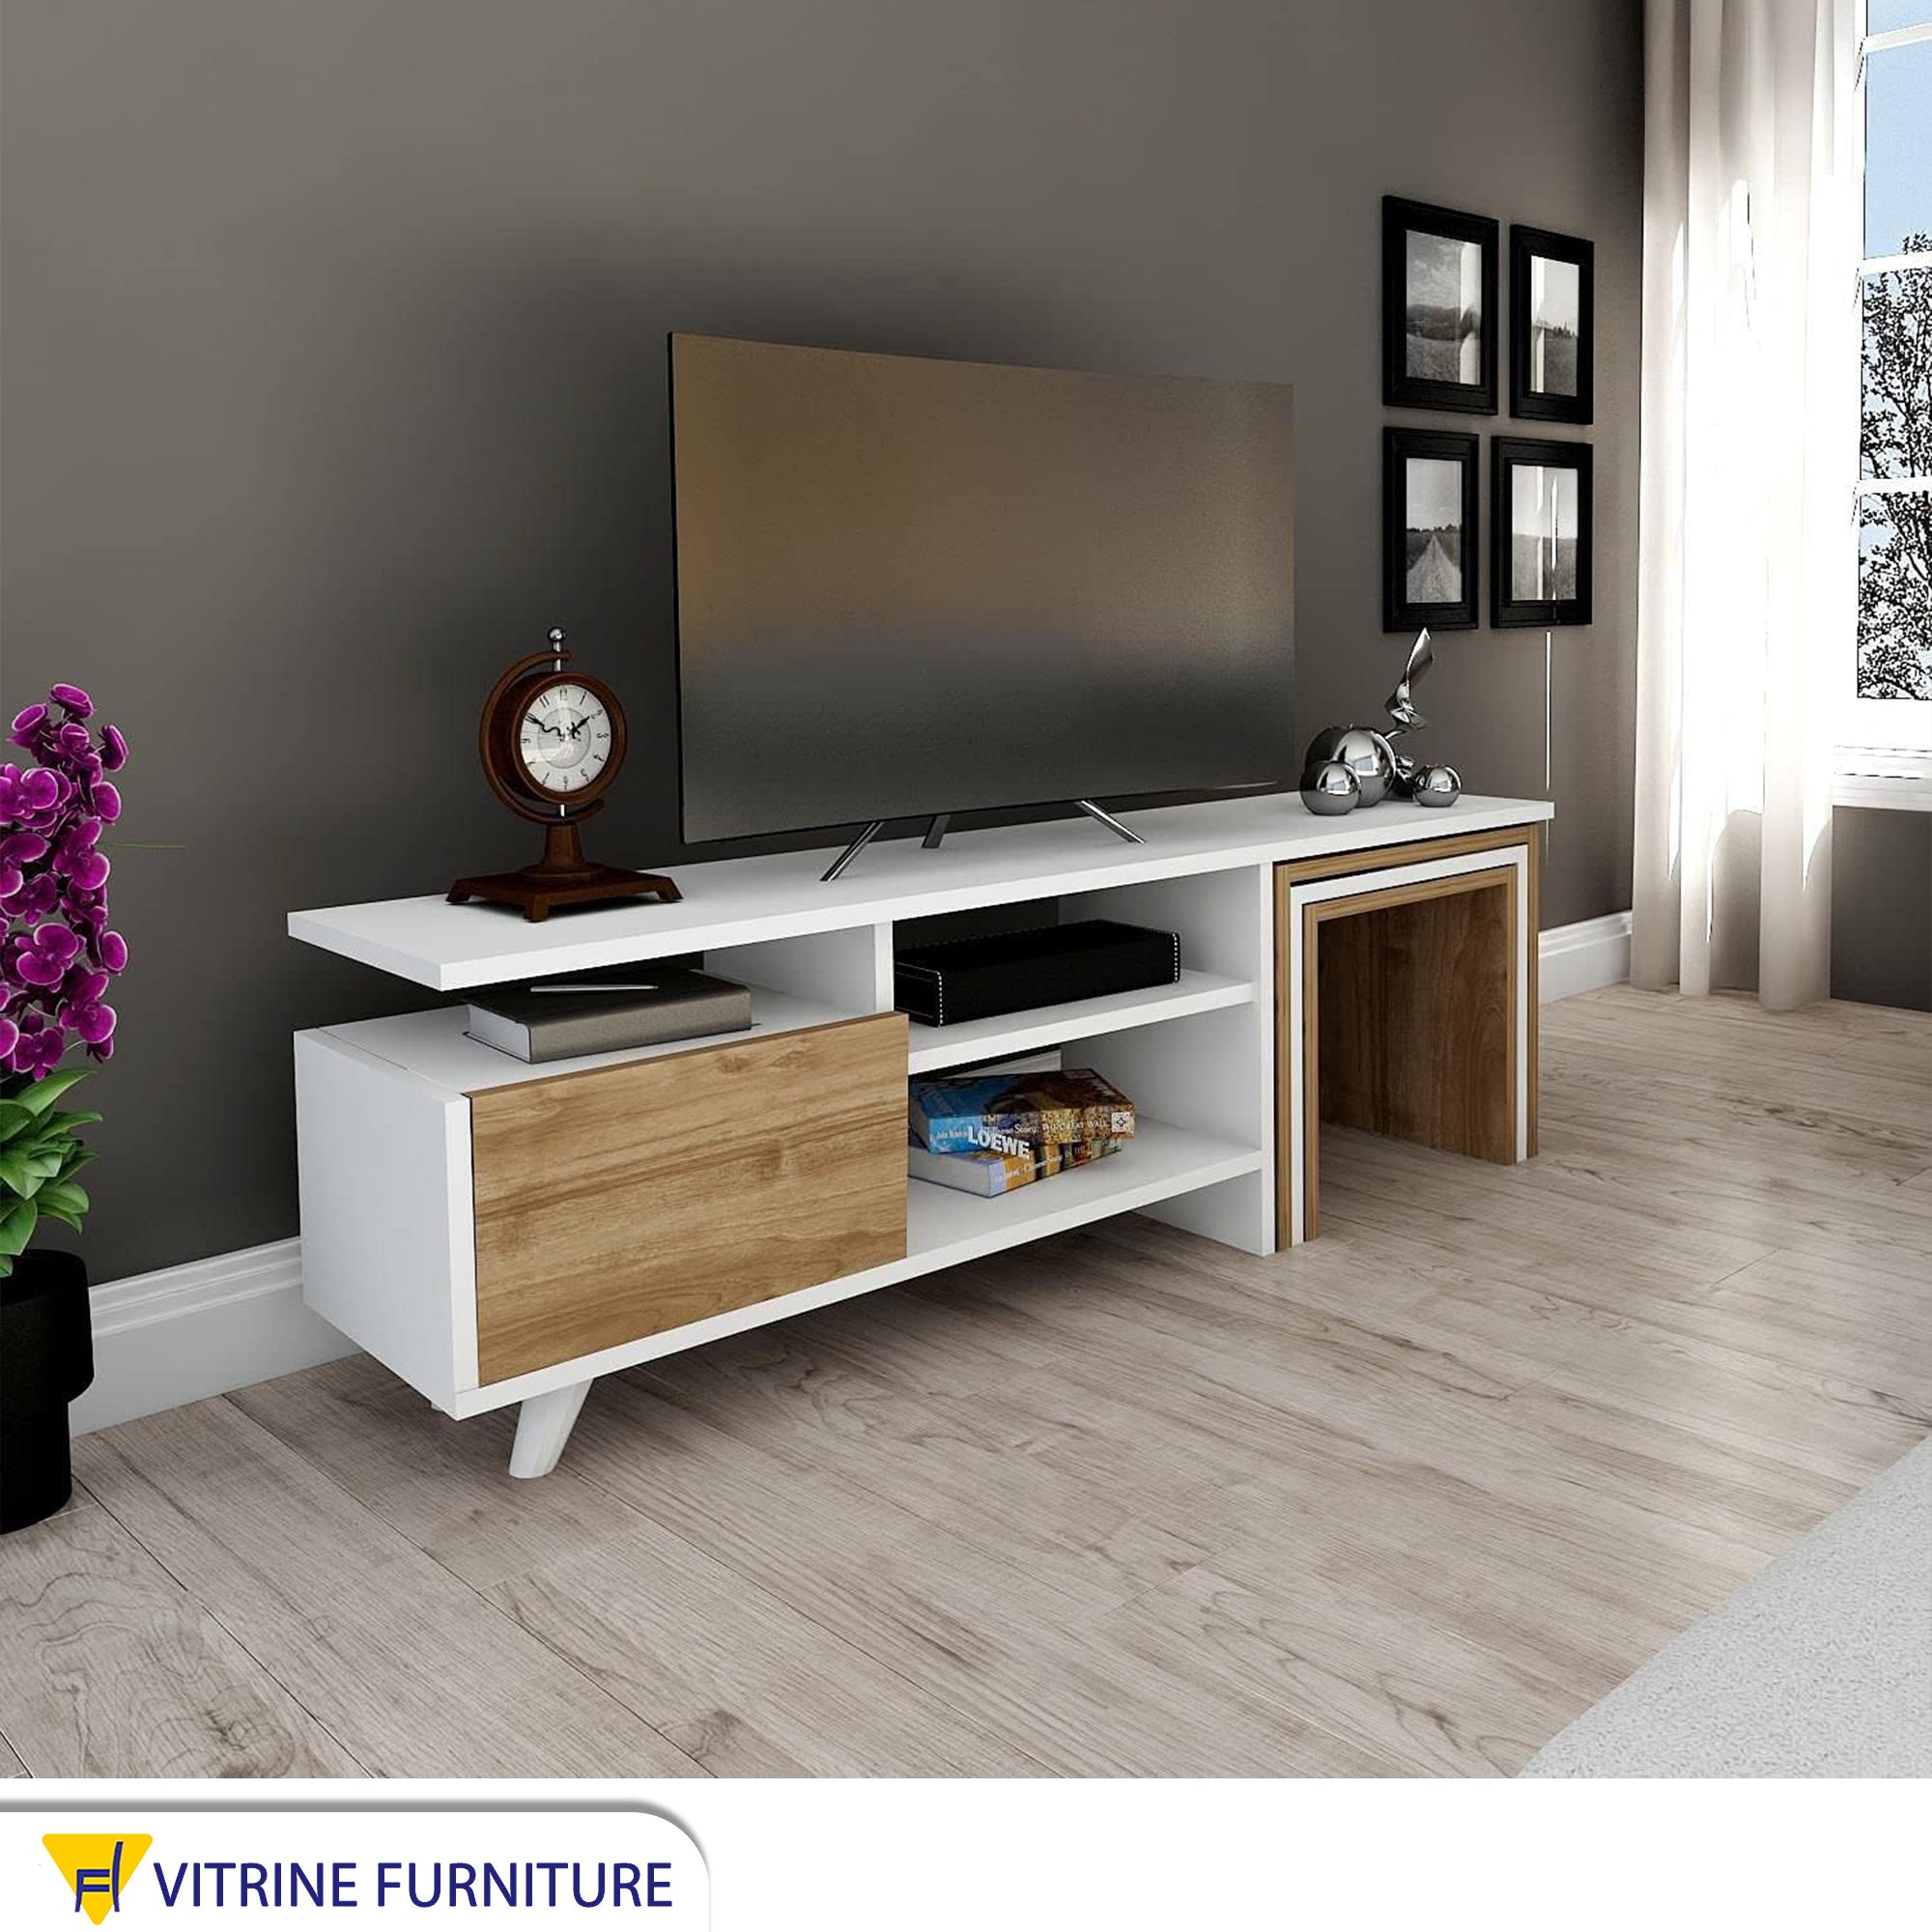 TV table in white and wooden color